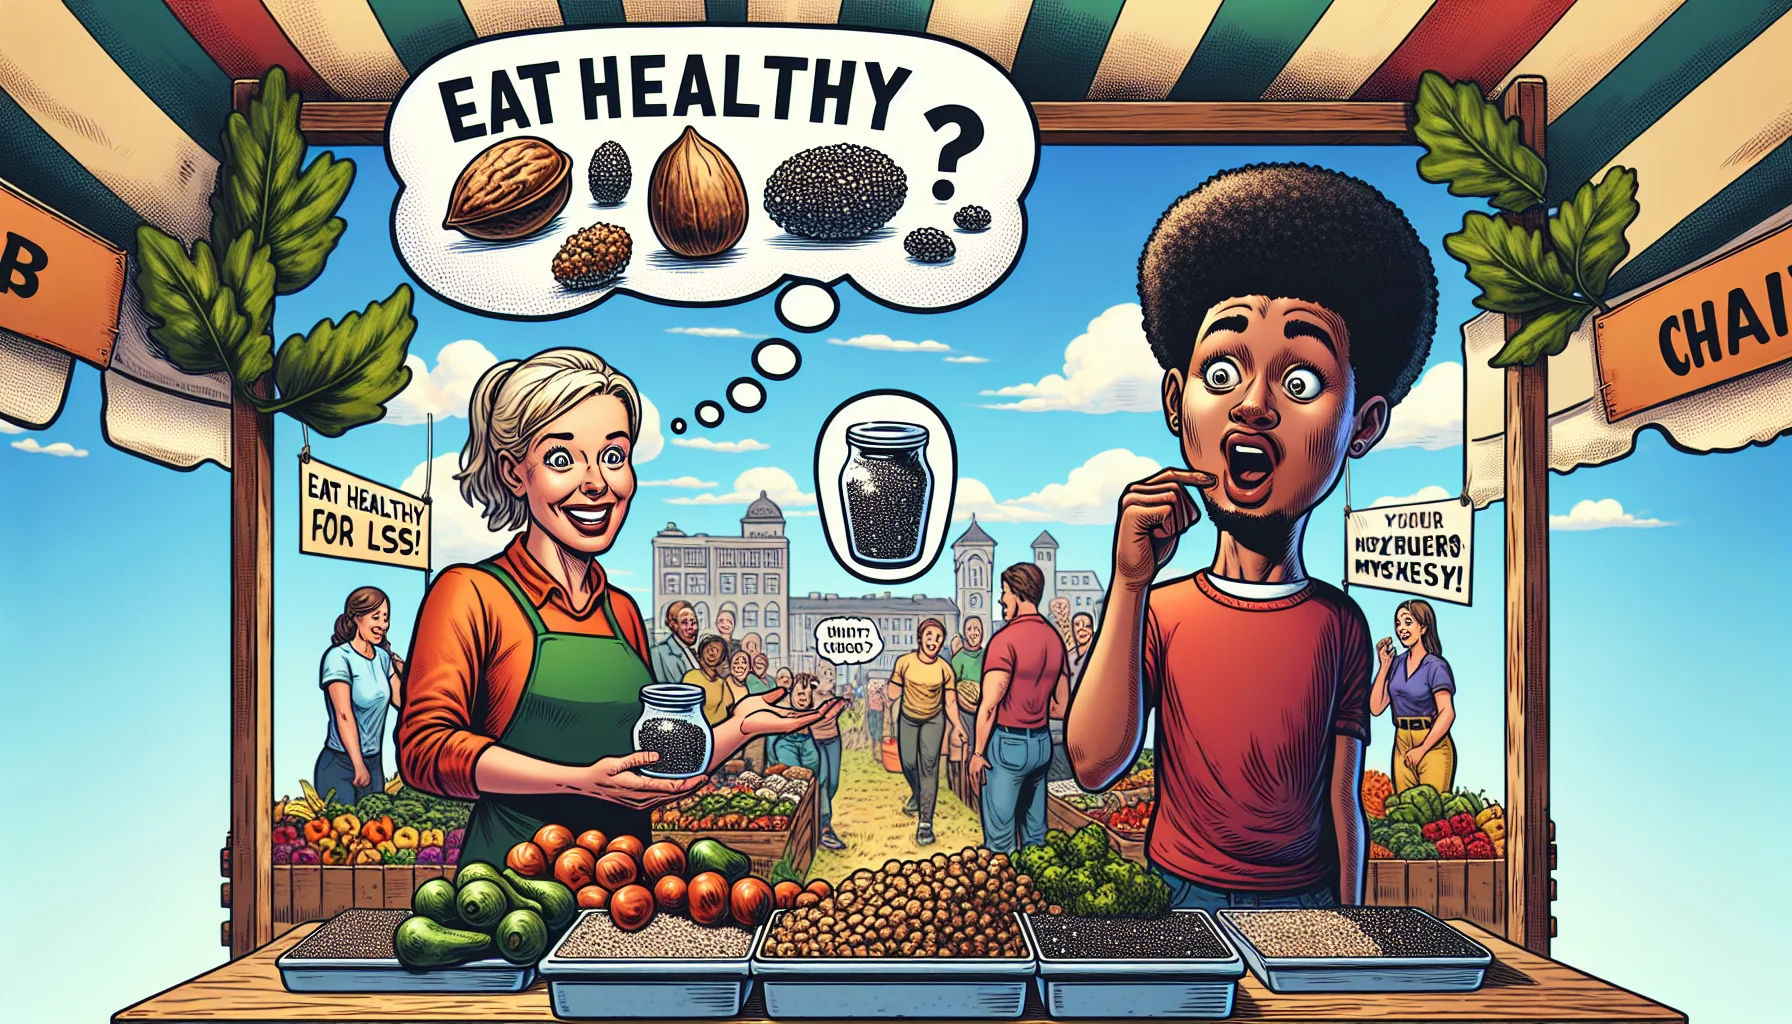 Envision an amusing scene promoting healthy, inexpensive eating habits: a bustling farmers market full of vibrant produce under a sunny sky. In the center spot, a stand with a big banner reading 'EAT HEALTHY FOR LESS' attracts attention. A jovial Caucasian lady vendor gives out taste-testing samples of chia seeds. Next to her, a surprised Black man has just tried chia seeds for the first time, his face amusingly perplexed in trying to figure out the taste. A comical thought bubble above his head showcases an unusual flavor fusion - imagine mini crunchy balls tasting like a blend of nut, earth and mystery, visually represented by a giant nut, a clump of soil and a question mark respectively.